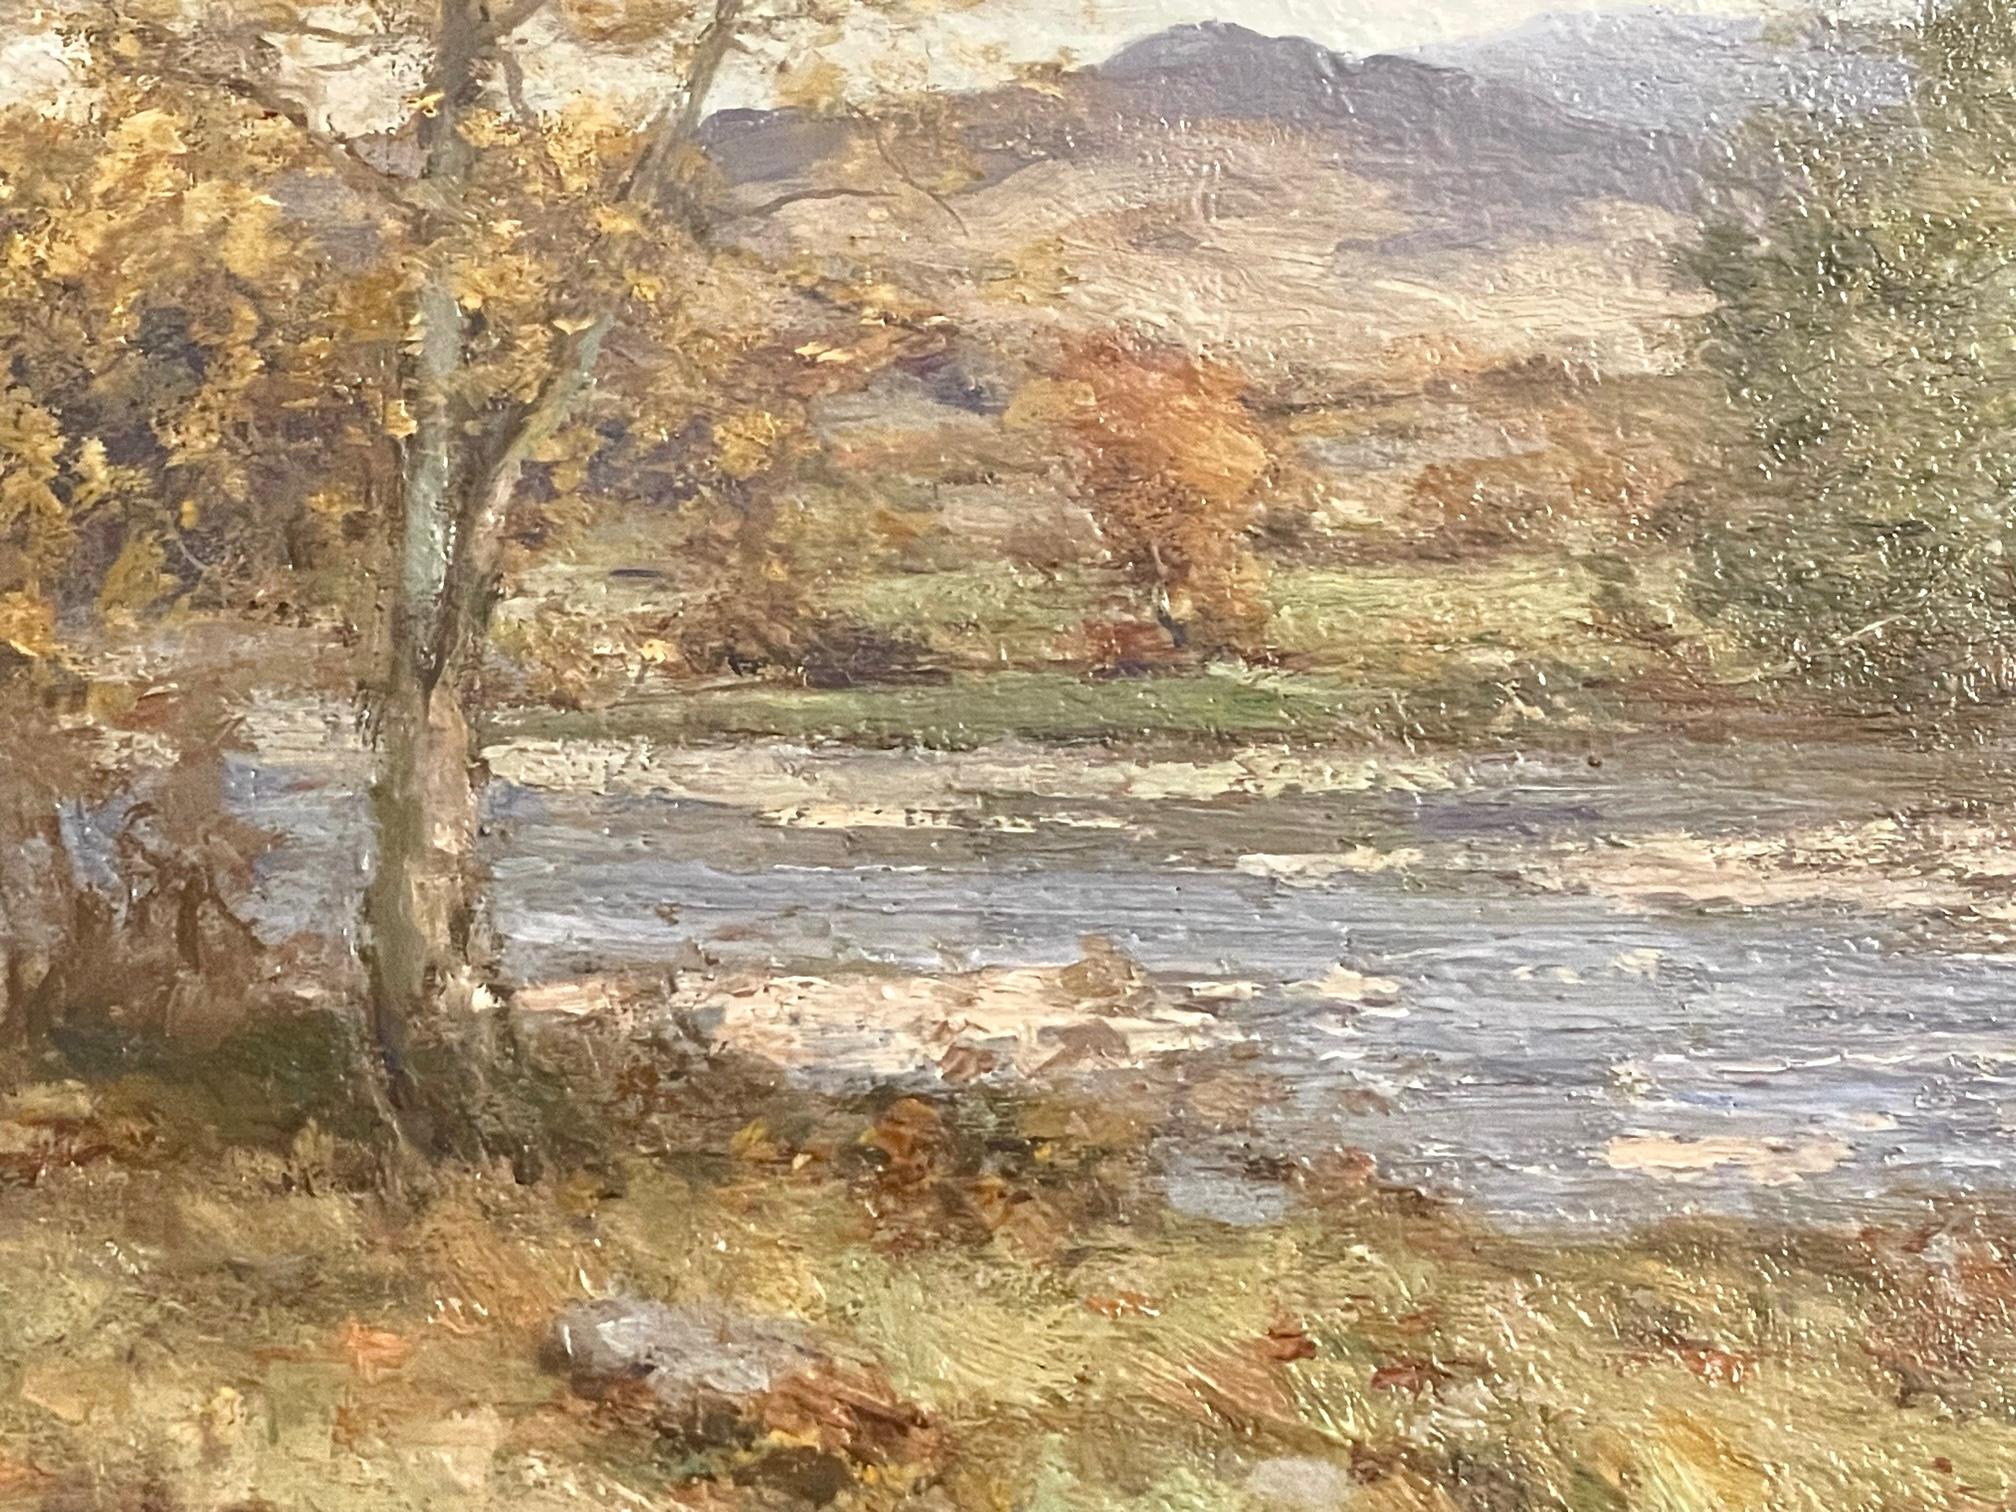 'The River in October' is a lovely impressionist rendering of Scottish autumn color by Joseph Morris Henderson, (1863-1936).  Early in his career Henderson exhibited in the Royal Scottish Academy and the Royal Academy. His work is represented in the